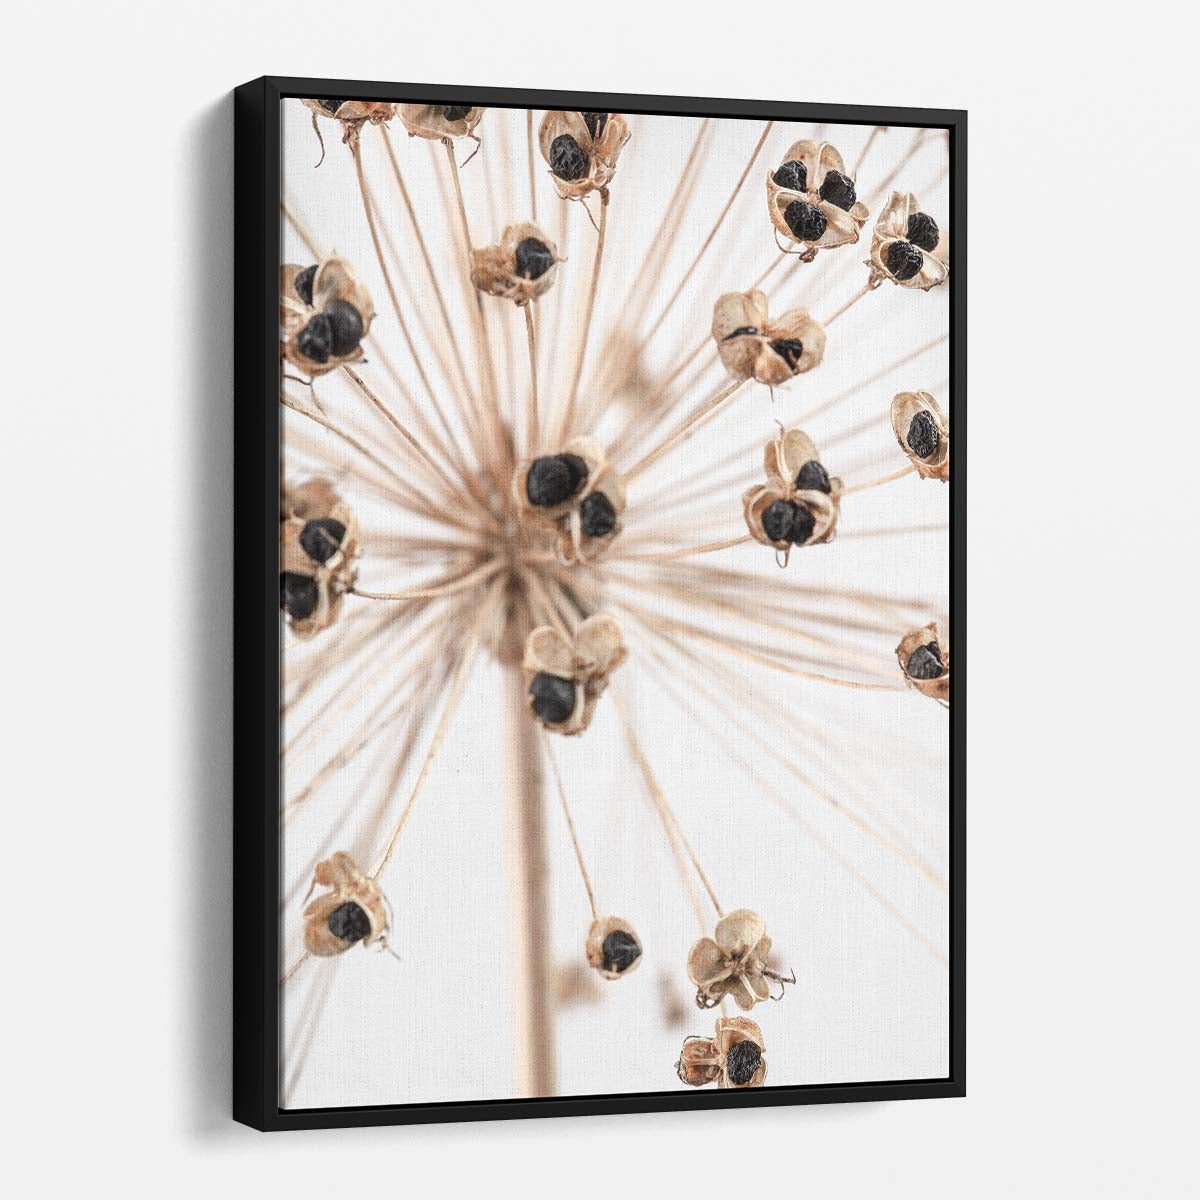 Dried Floral Botanical Photography Beige Flower Still Life Art by Luxuriance Designs, made in USA